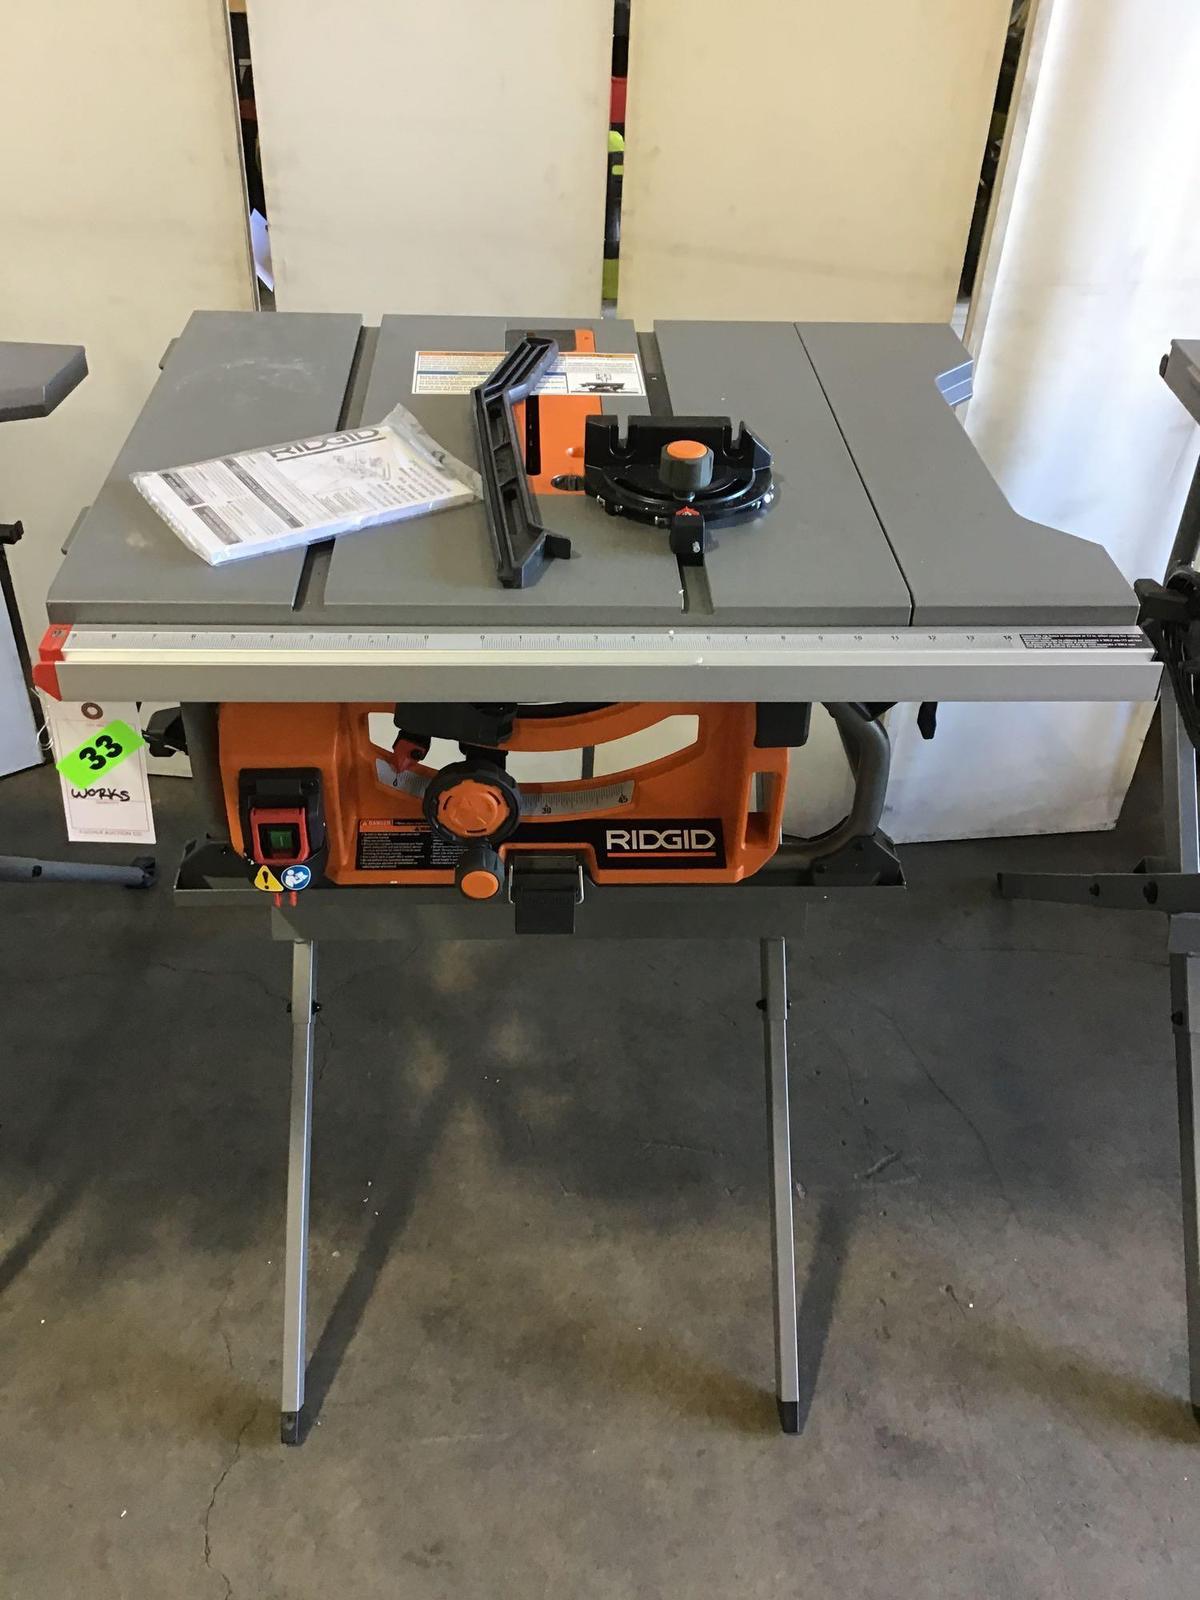 Ridgid 120V 10 in. Table Saw with Folding Stand*WORKS*MISSING FENCE, BLADE GUARD, AND HARDWARE*